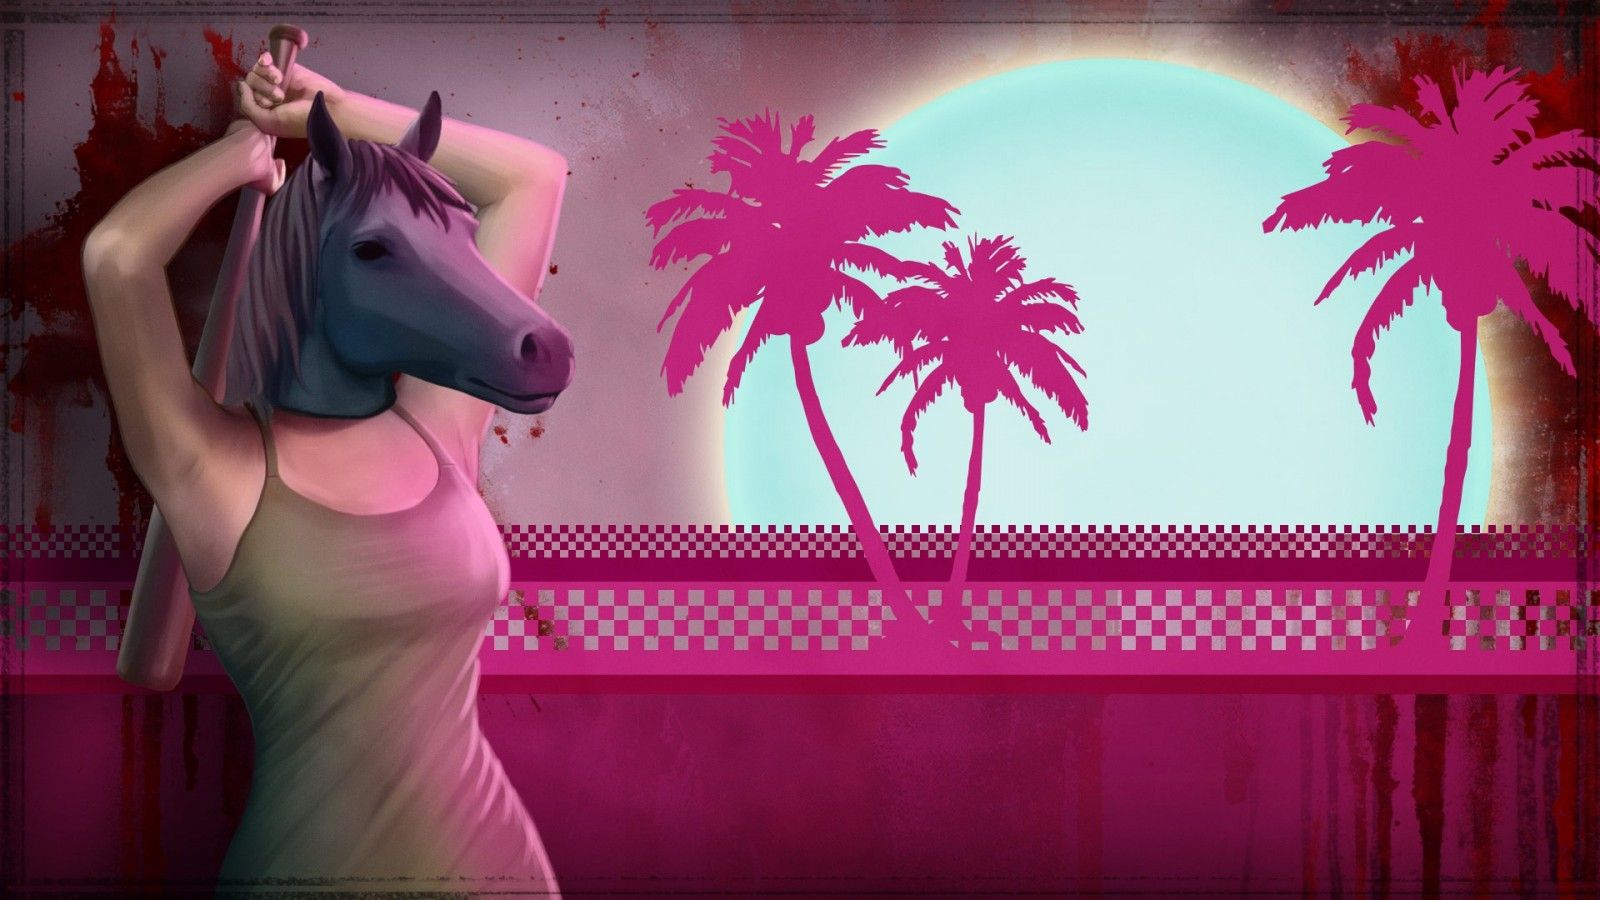 video games, women, anime, mask, palm trees, pink, Hotline Miami, color, stage, screenshot, computer wallpaper, fictional character